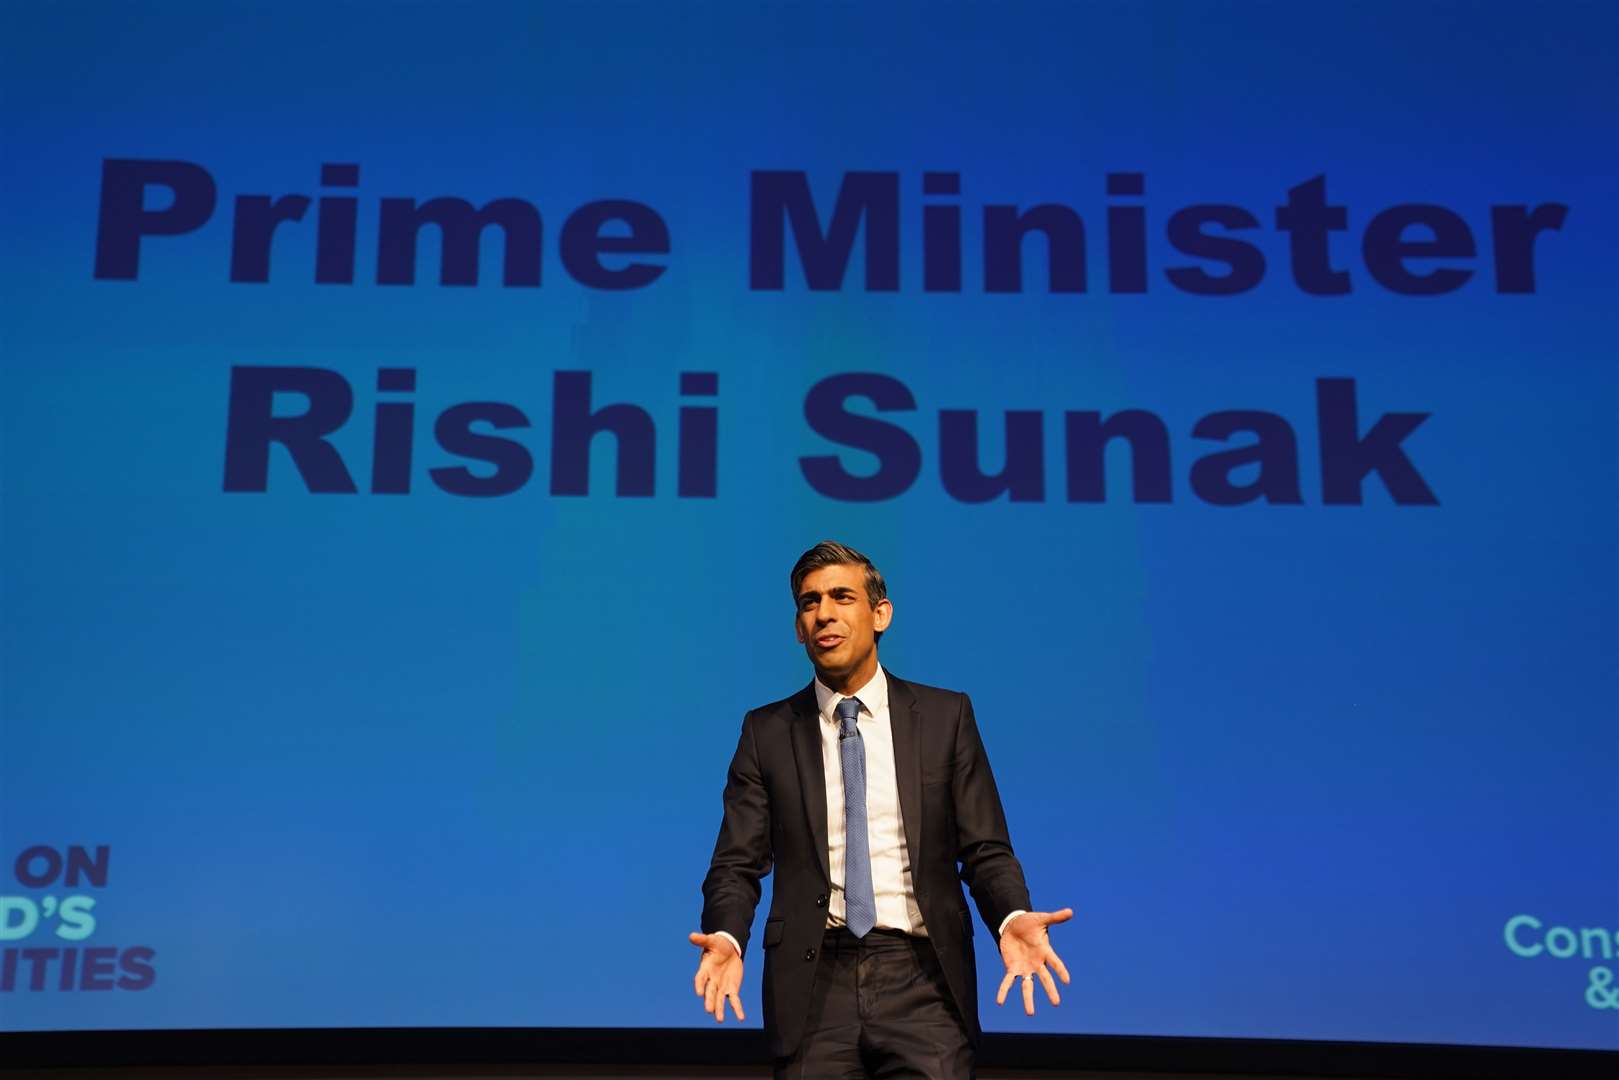 Prime Minister Rishi Sunak addressed the first day of the Scottish Conservative conference in Glasgow (Andrew Milligan/PA)